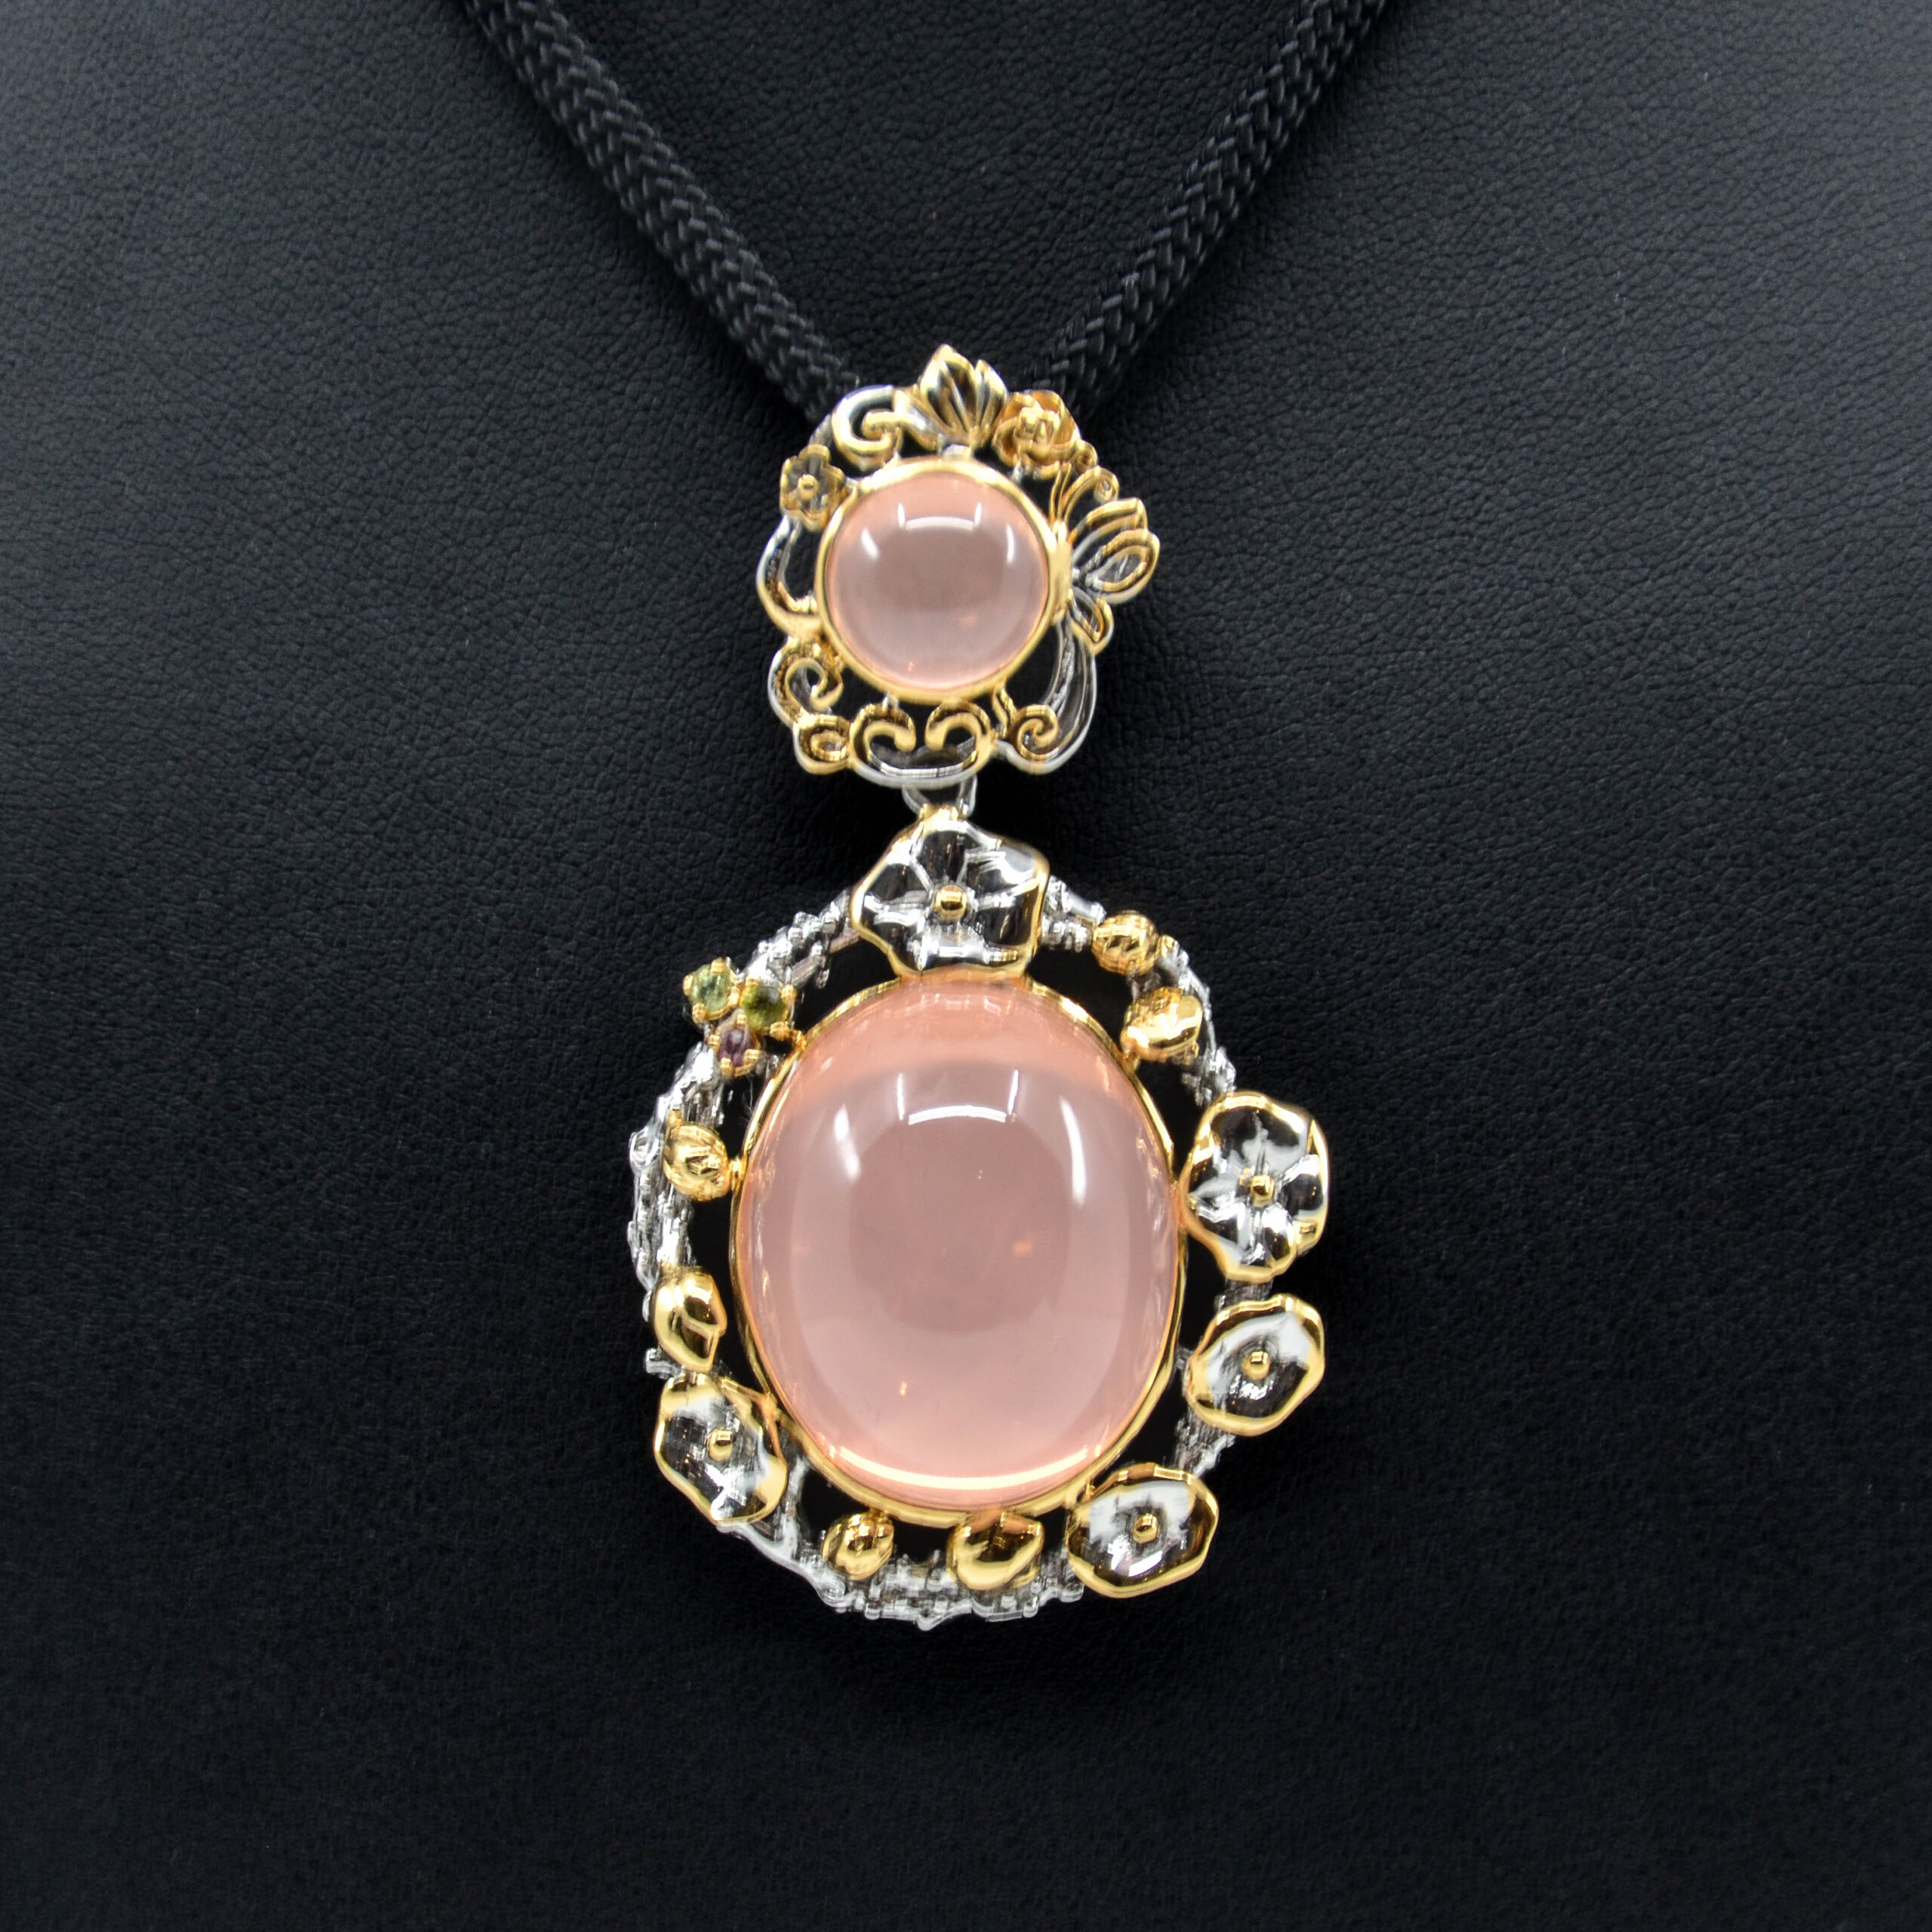 Rare Natural Himalayan Clear Pink Rose Quartz Pendant Necklace with Silver and Gold Colored Metal Setting, Flower Design